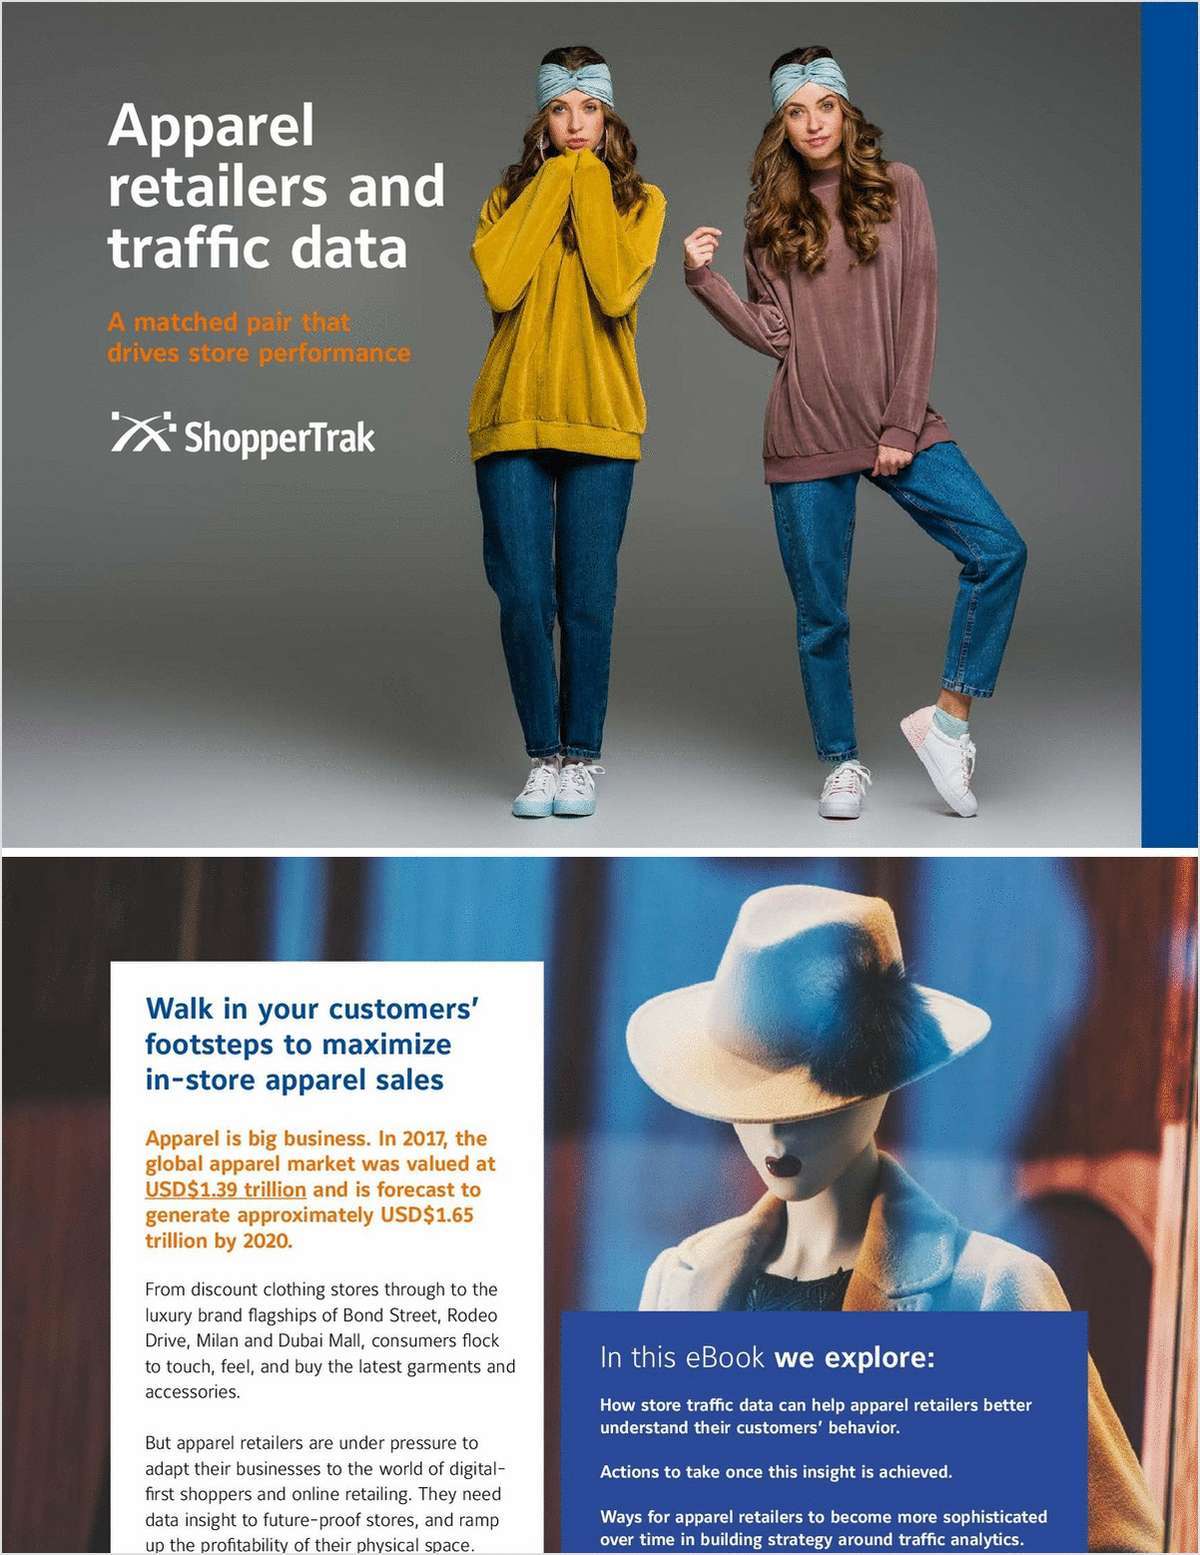 5 Actionable Tips to Maximize Apparel Sales with Shopper Traffic Data